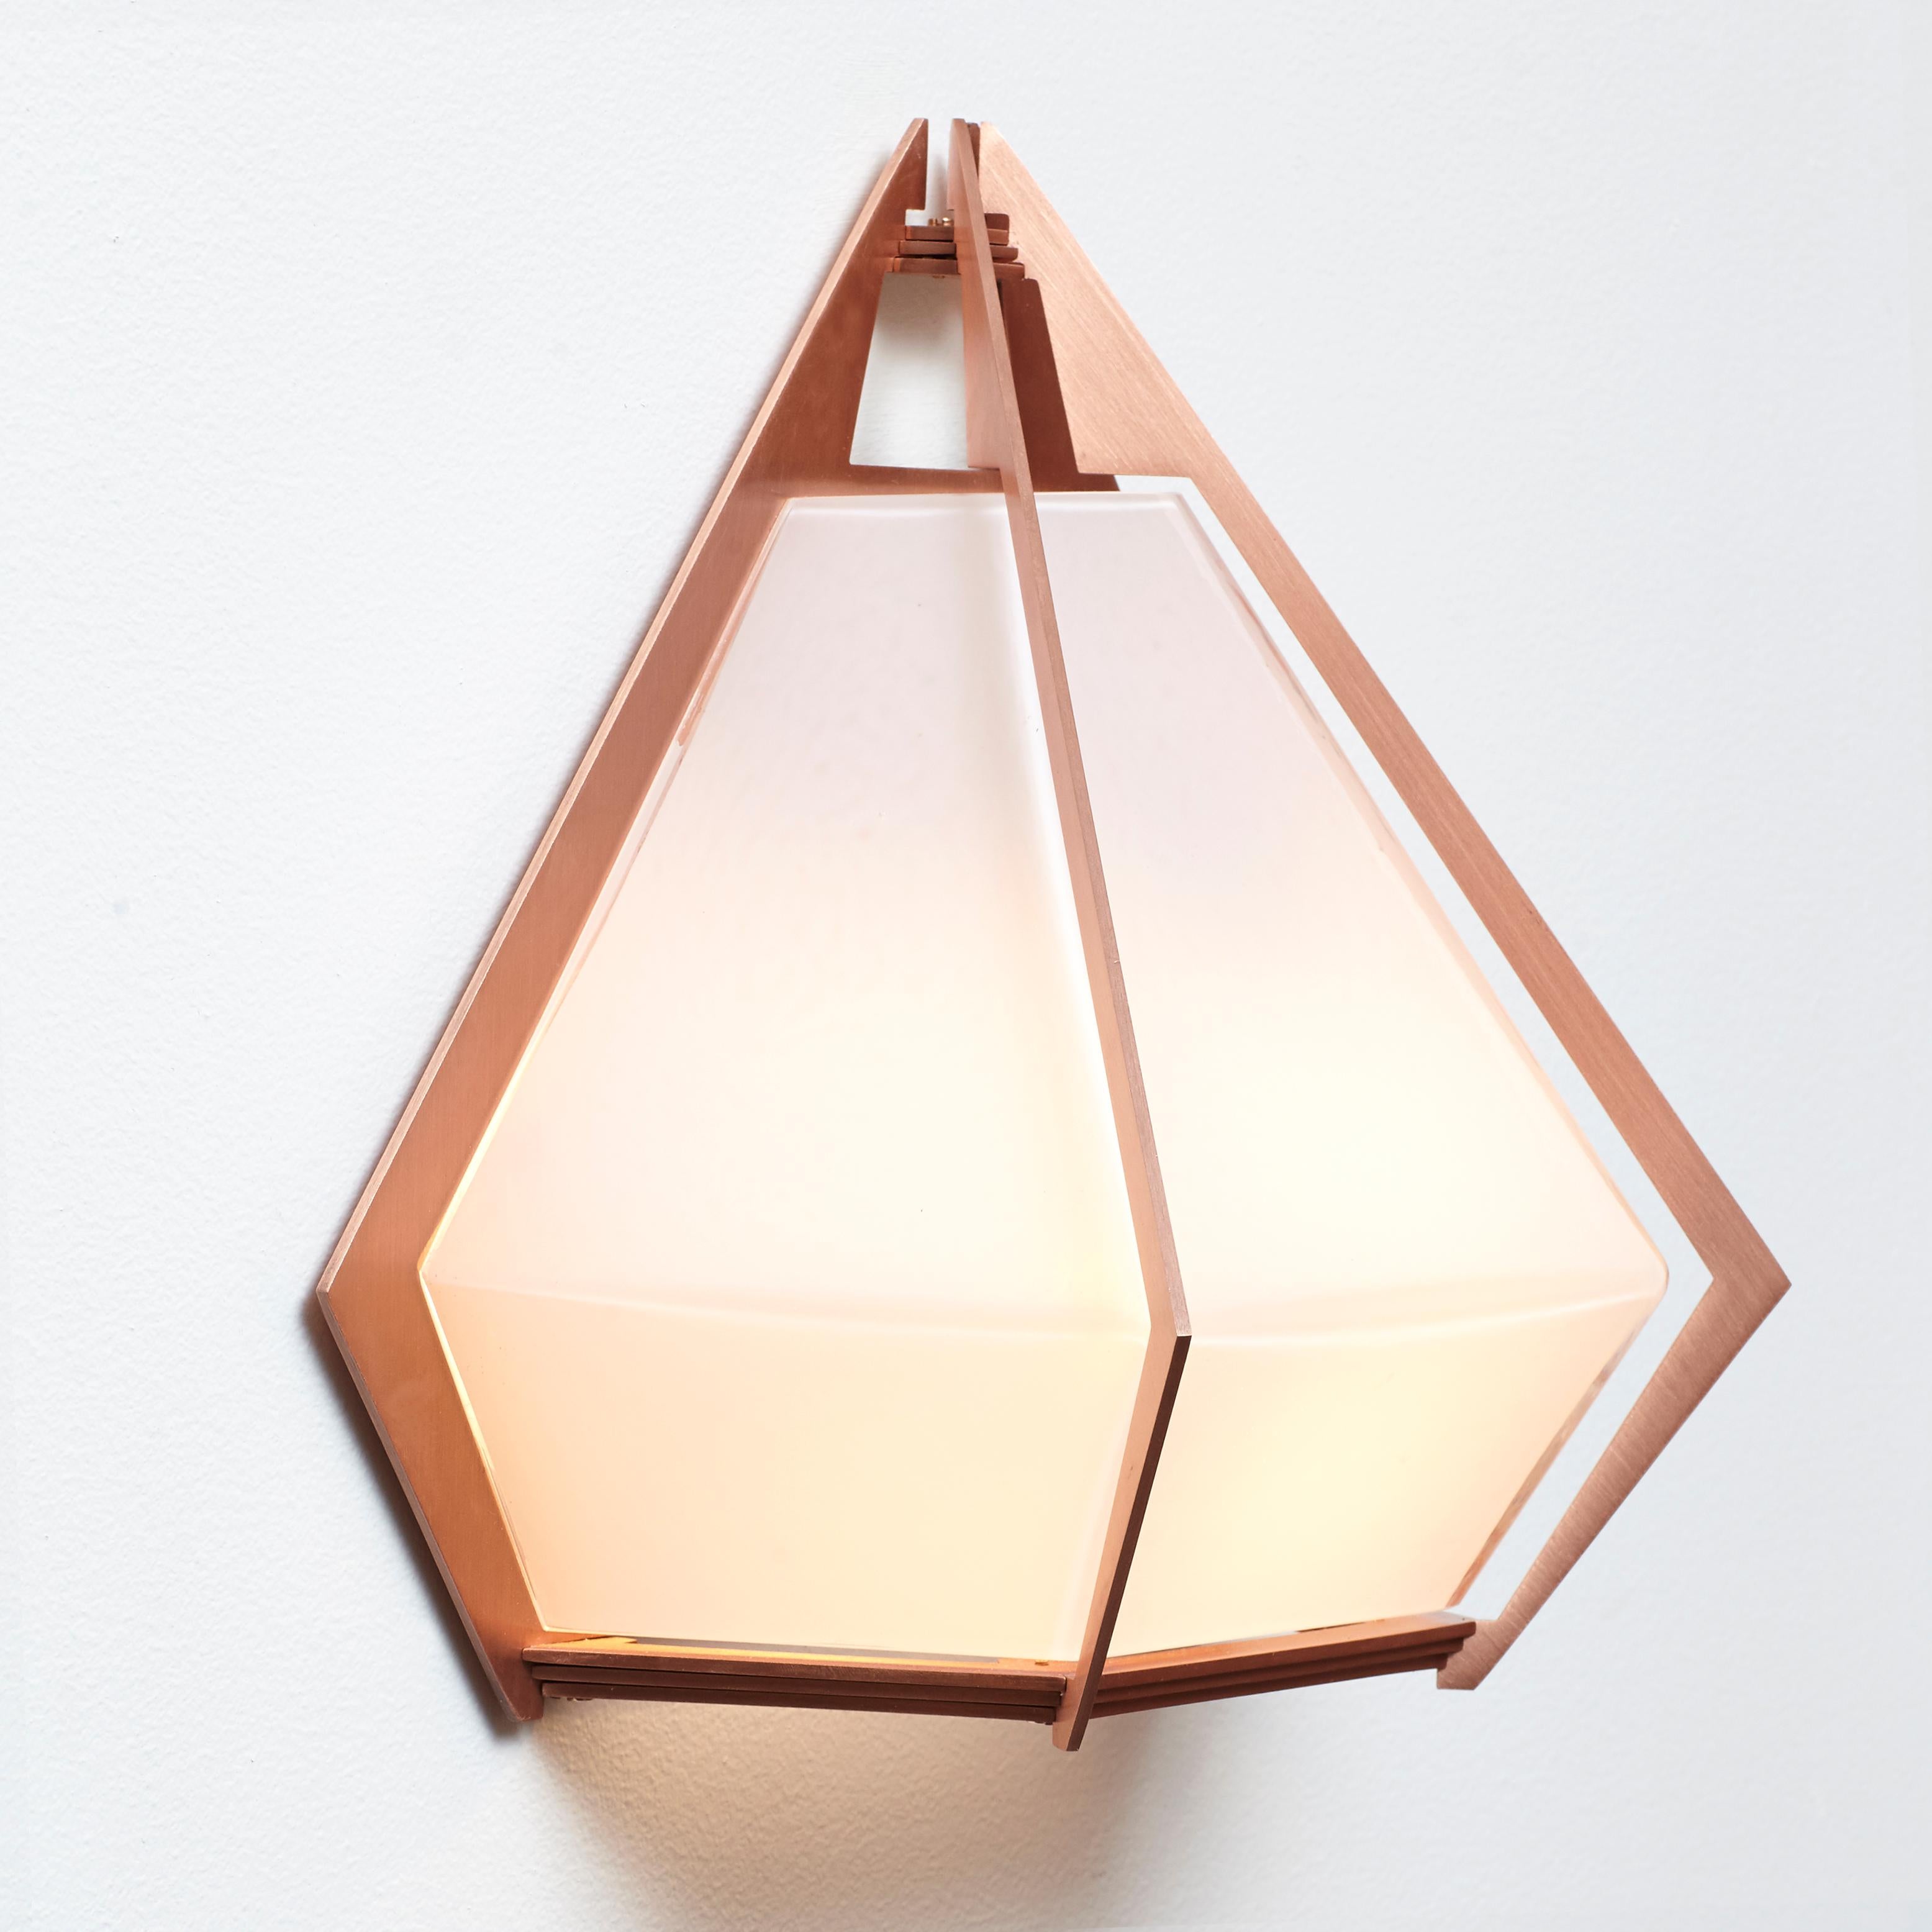 The Harlow Wall Sconce offers an elegant starburst of light that reflects and refracts through its mold-blown glass shade. A sparkling prism, the Harlow Wall Sconce is directly inspired by the world of jewelry with its metallic frame encasing a